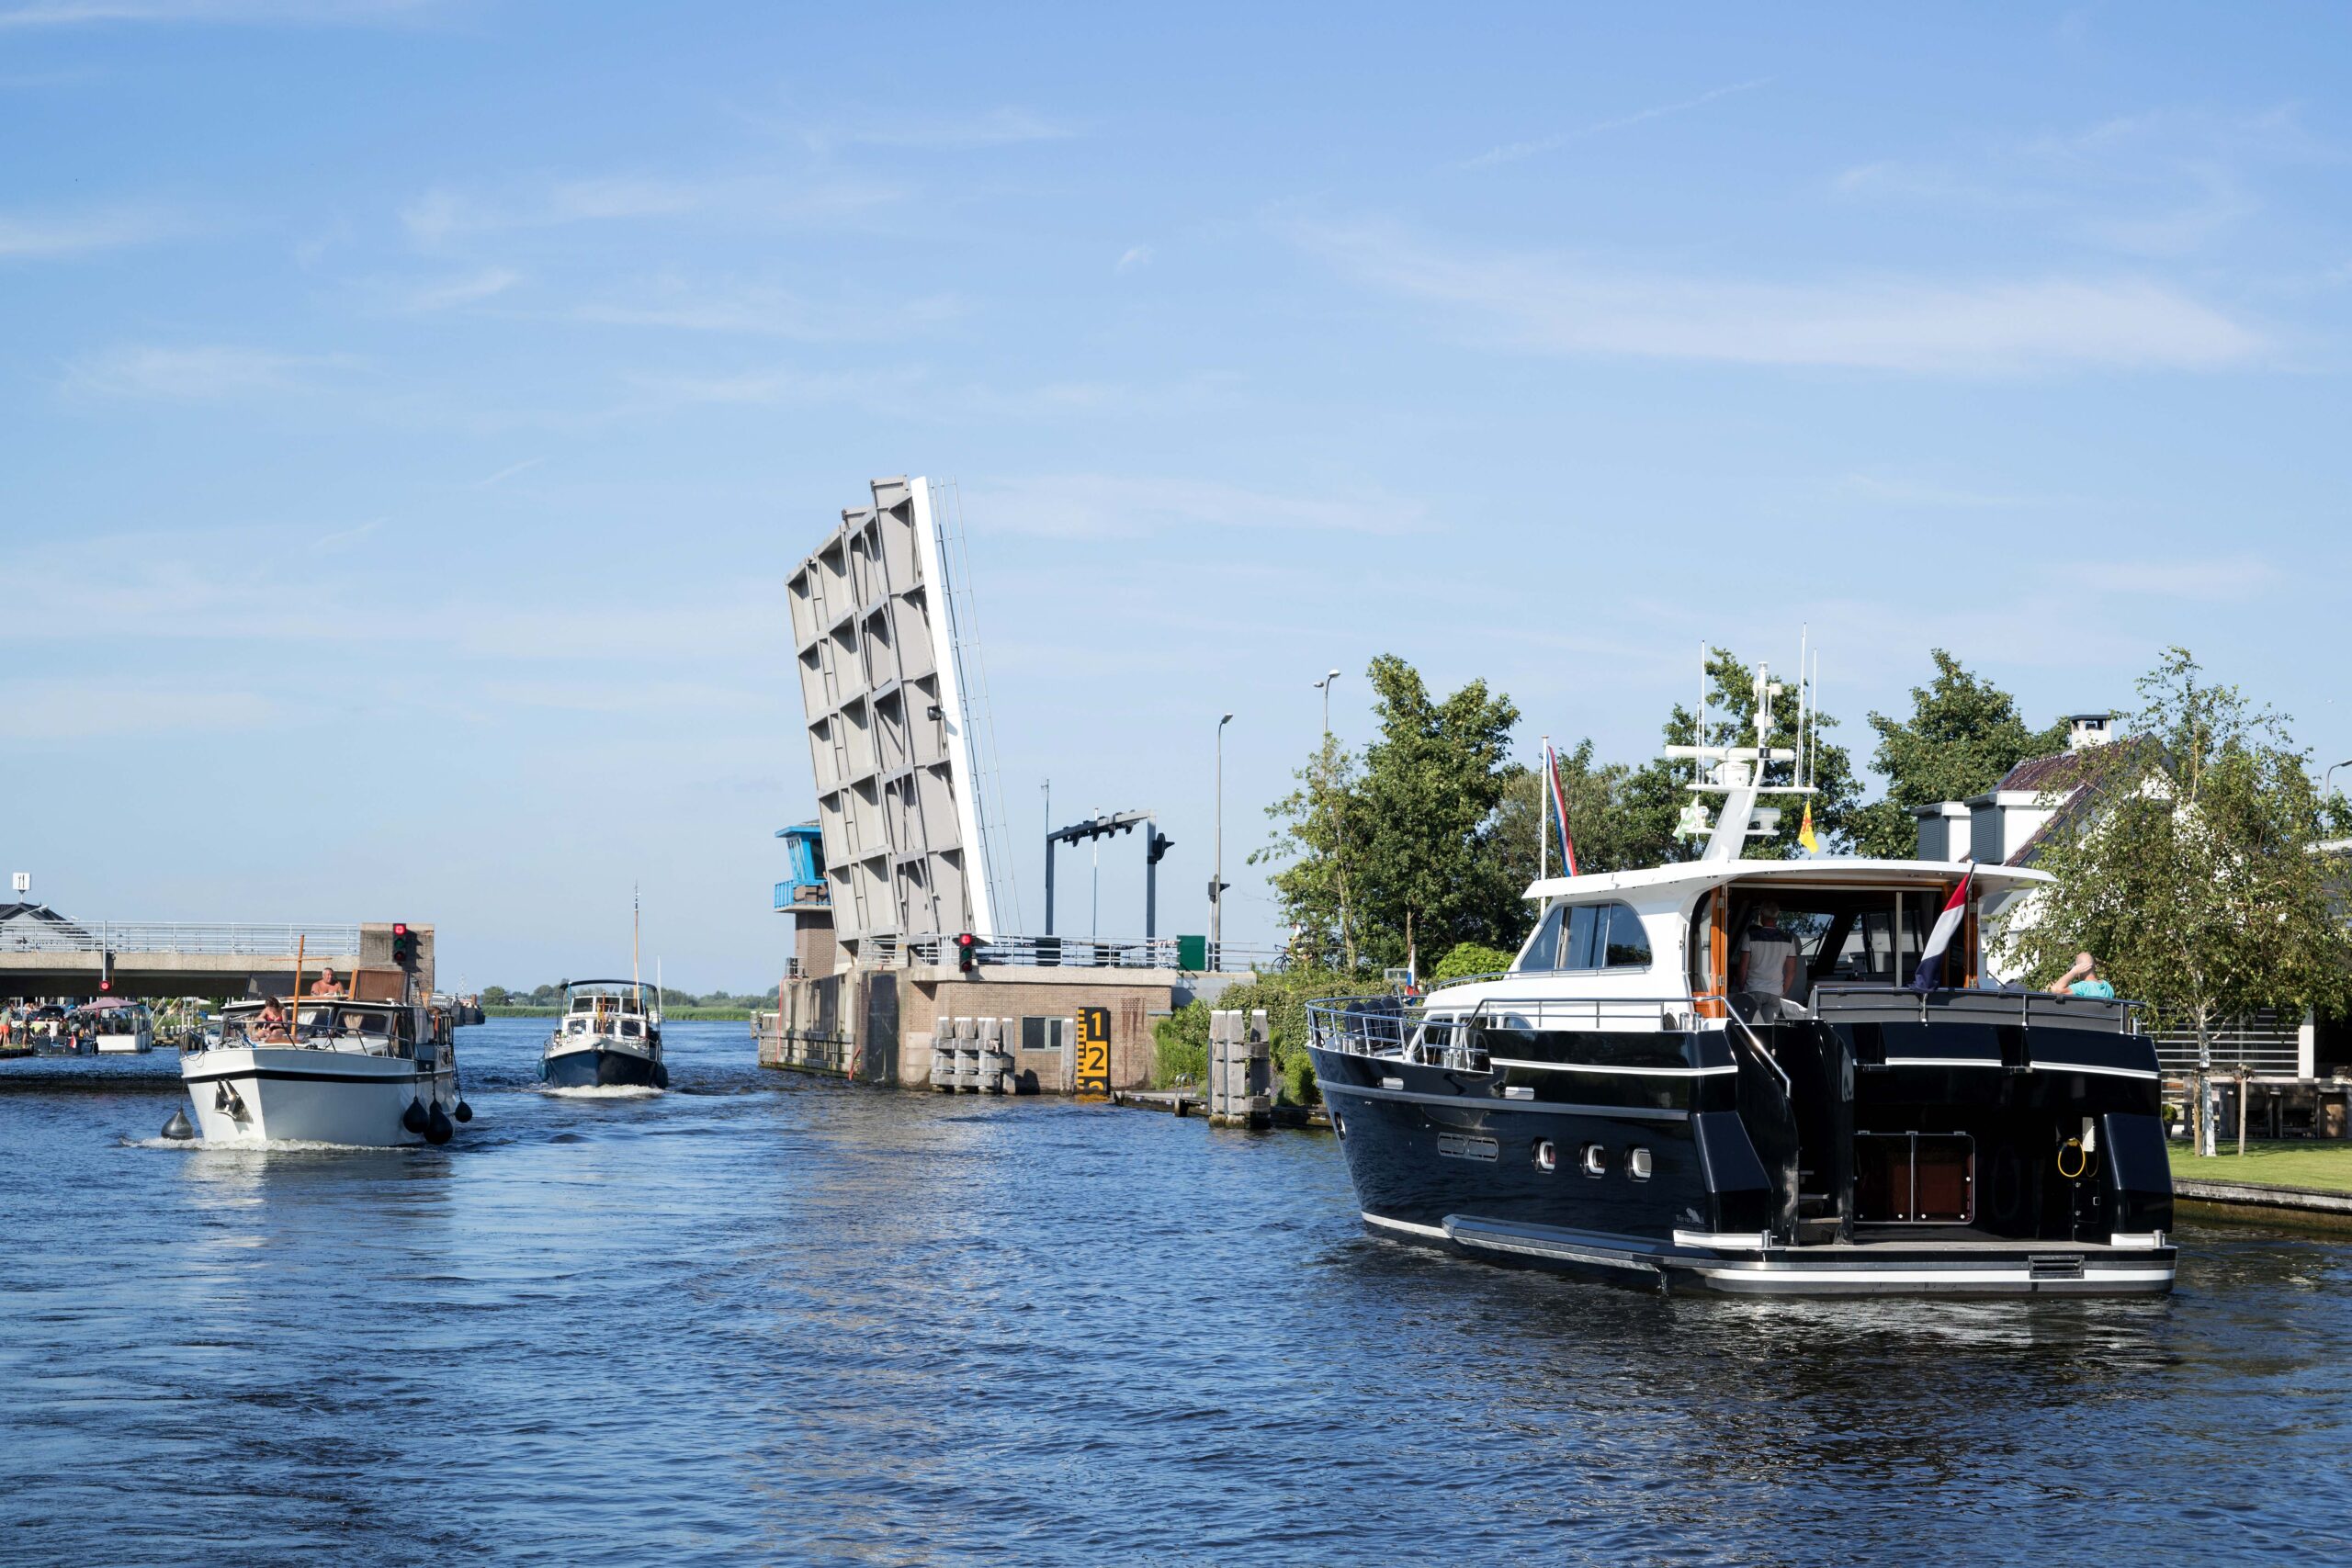 bascule bridge over canal in the Netherlands